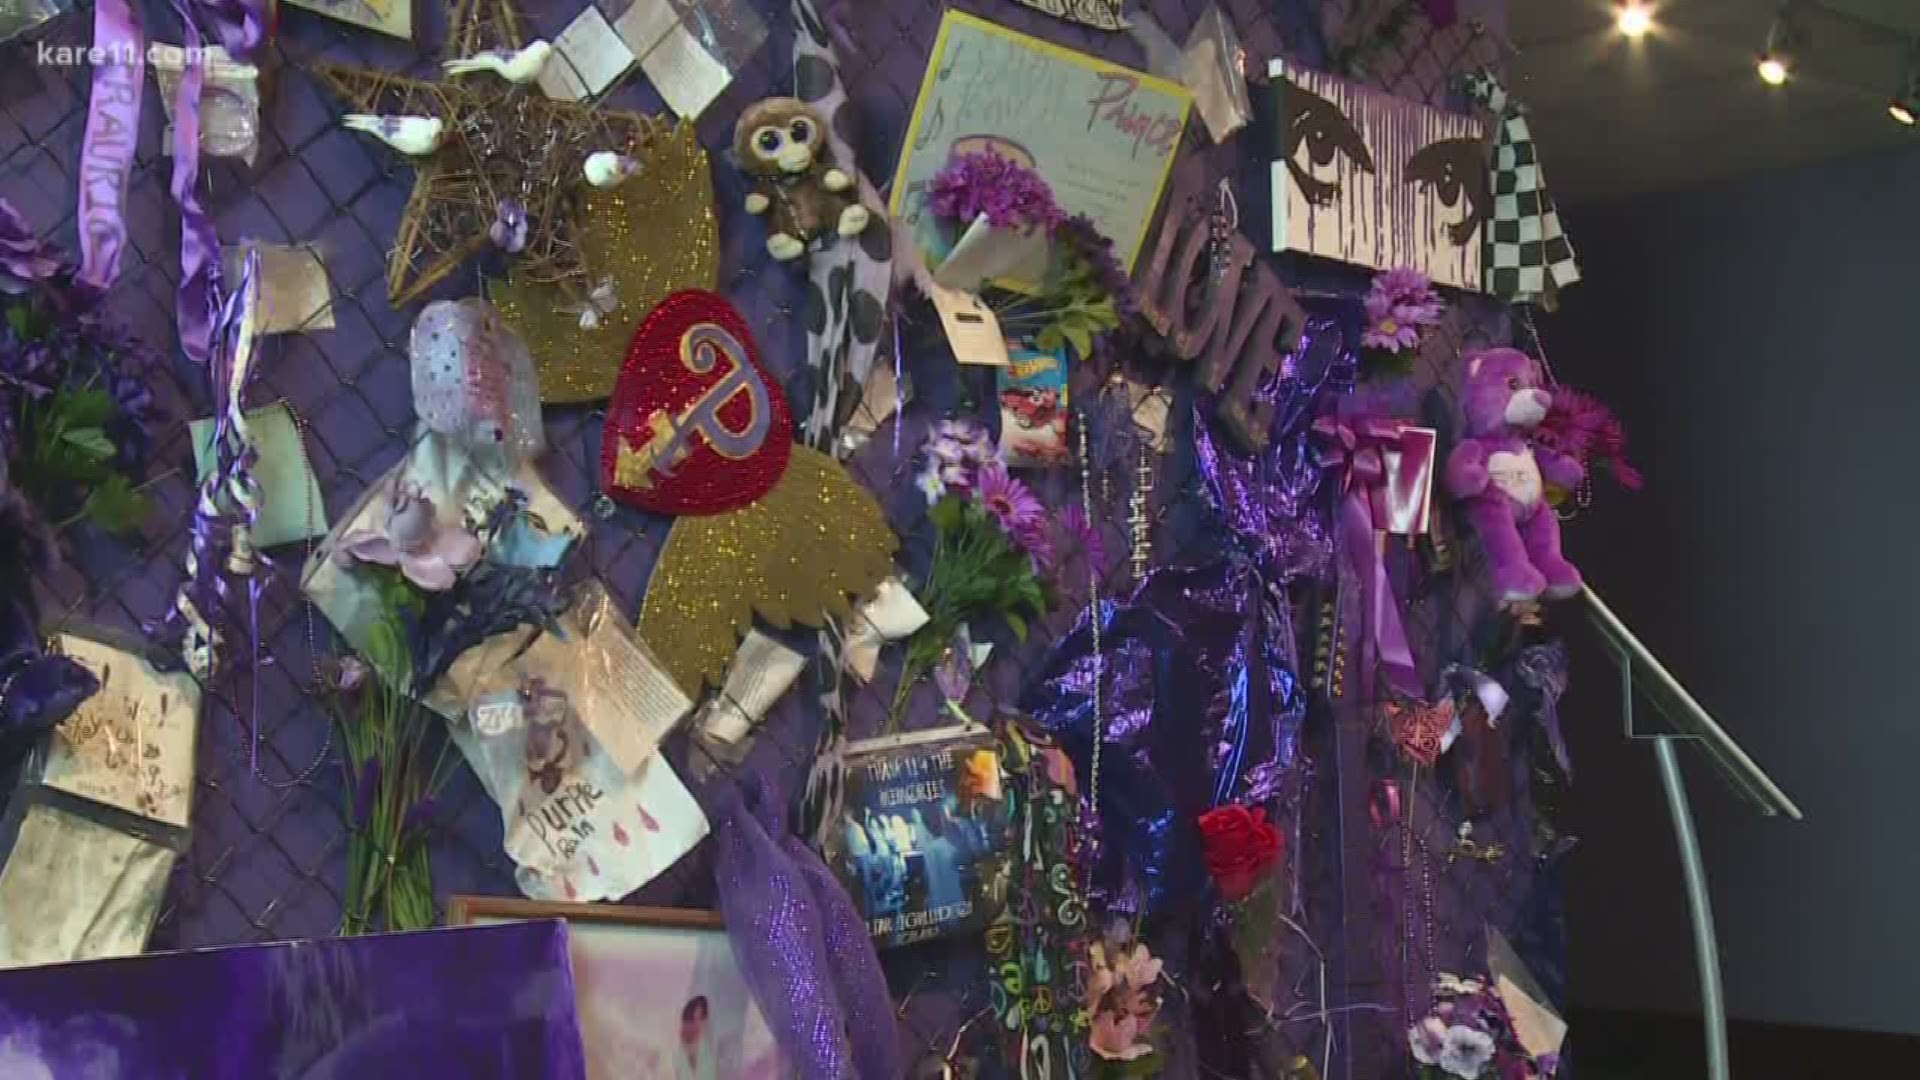 Celebration 2019, the annual four-day event honoring the life and legacy of Prince, is April 25 to 28 at Paisley Park in Chanhassen. https://kare11.tv/2FSkRSh